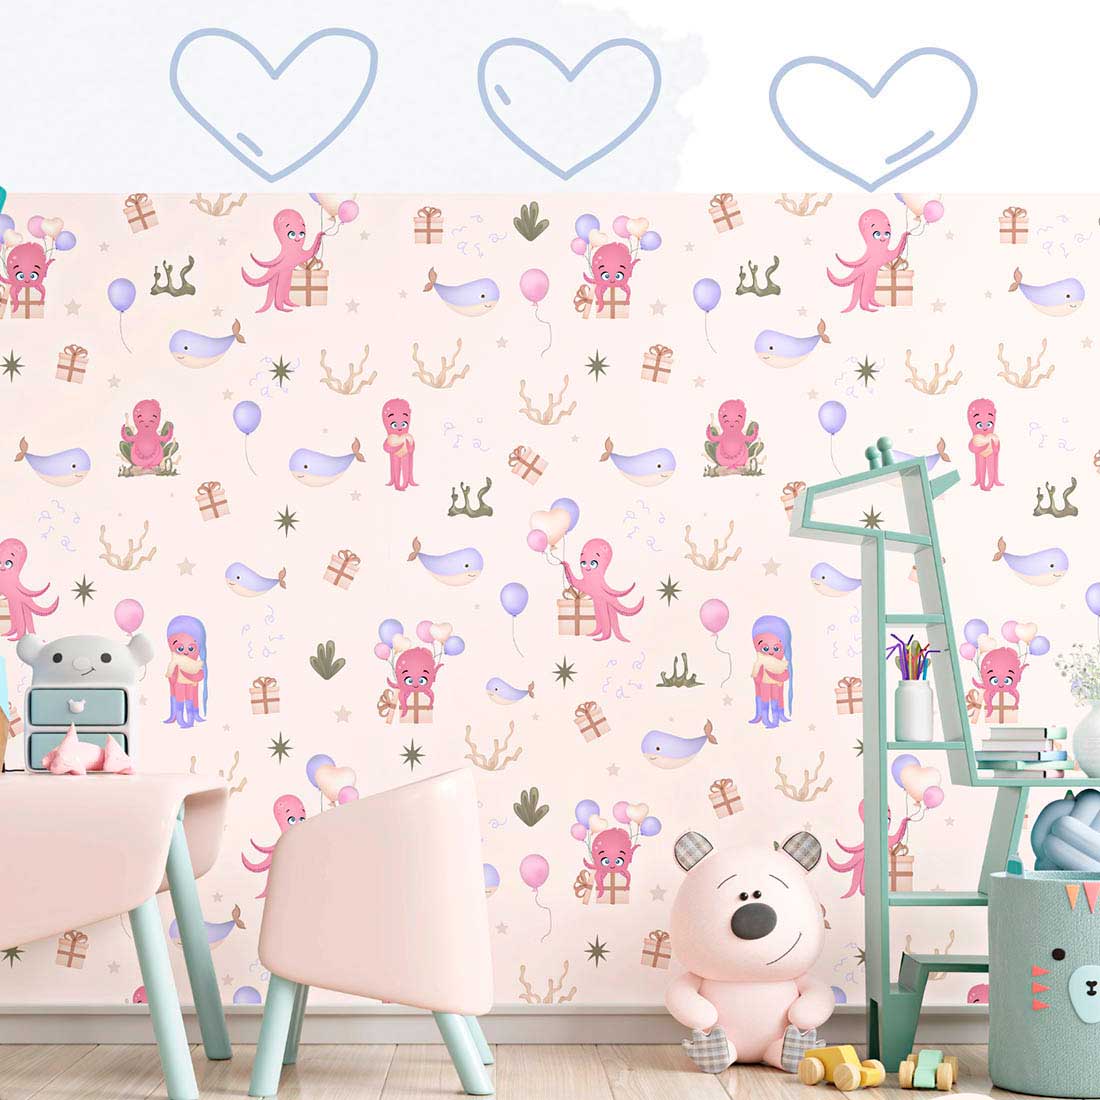 Image of wall wallpaper with irresistible patterns with cartoon octopus.